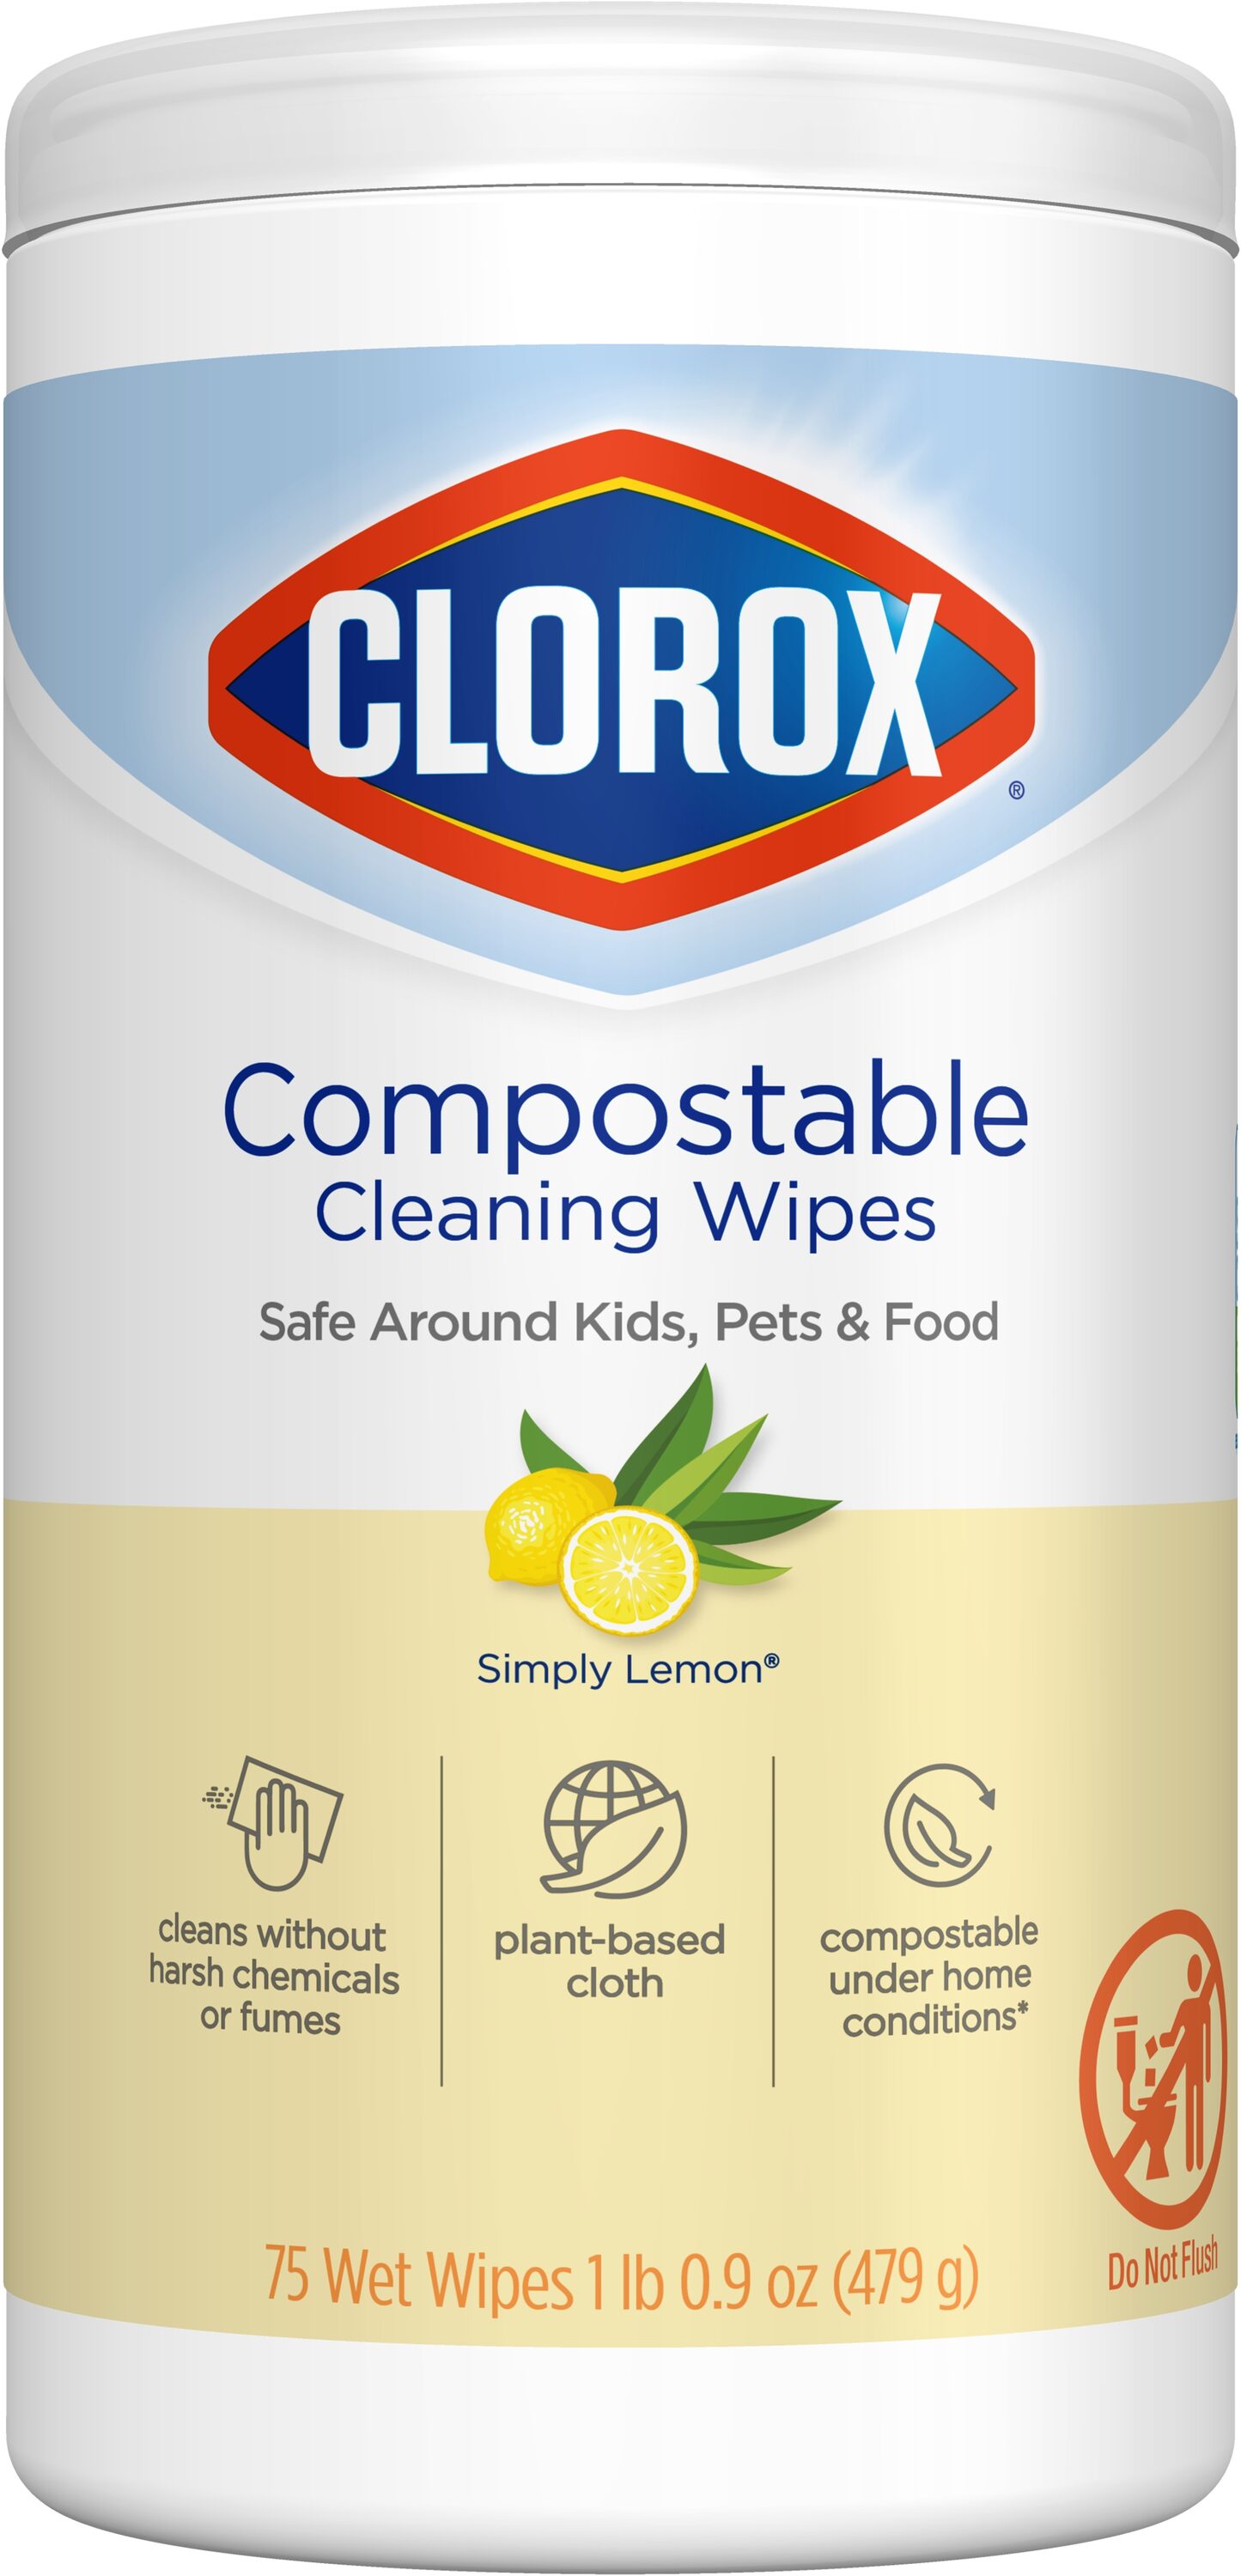 Dropship Clorox Compostable Cleaning Wipes, All Purpose Wipes, Simply  Lemon, 75 Count to Sell Online at a Lower Price